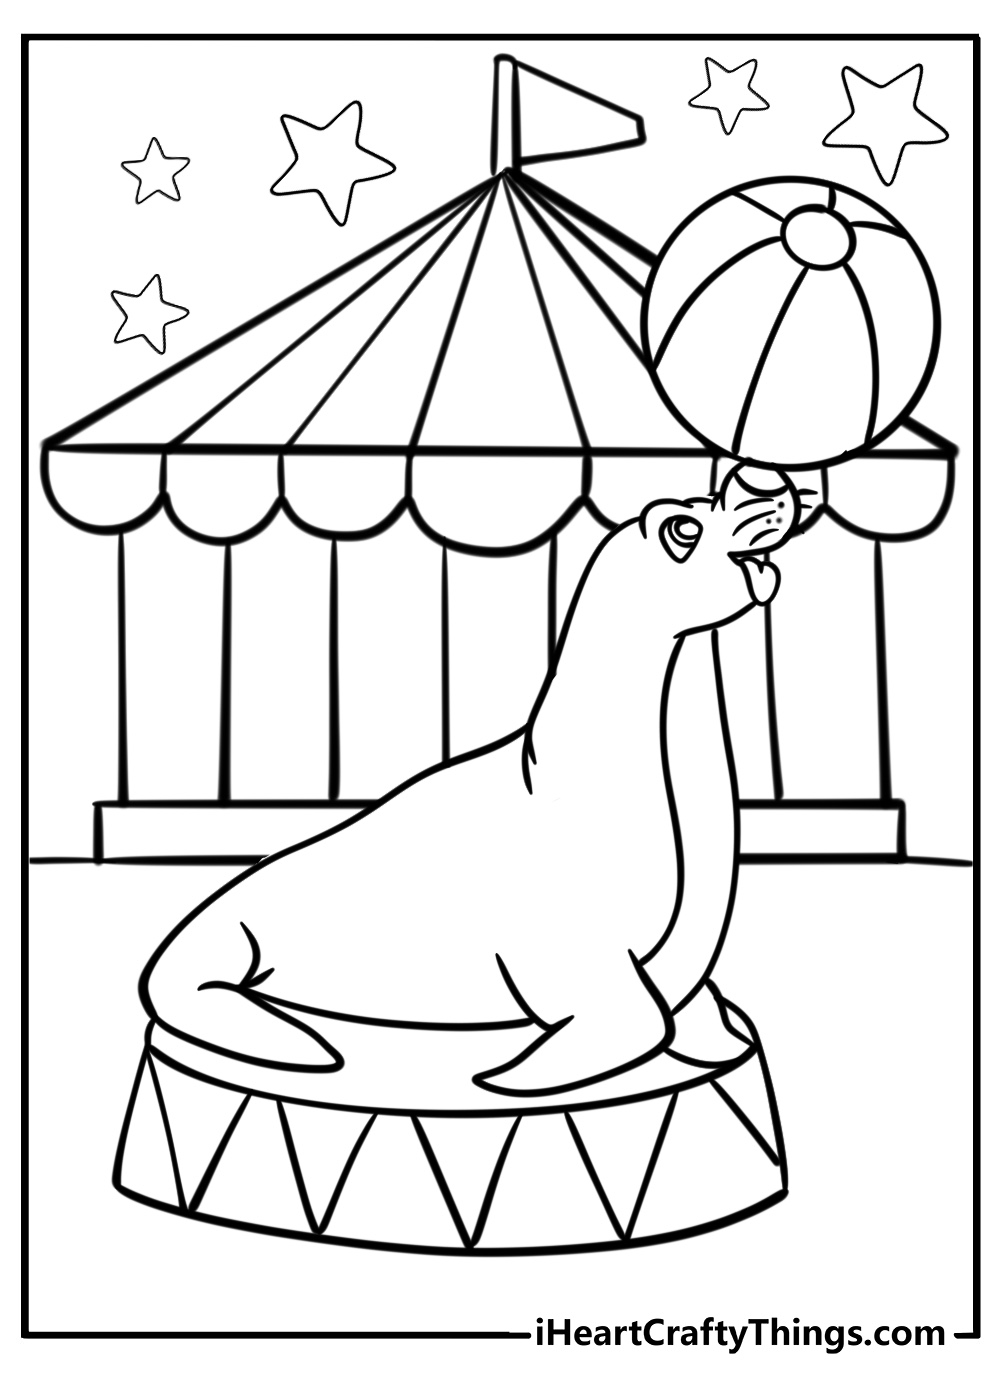 Circus coloring page of seal balancing ball on its nose